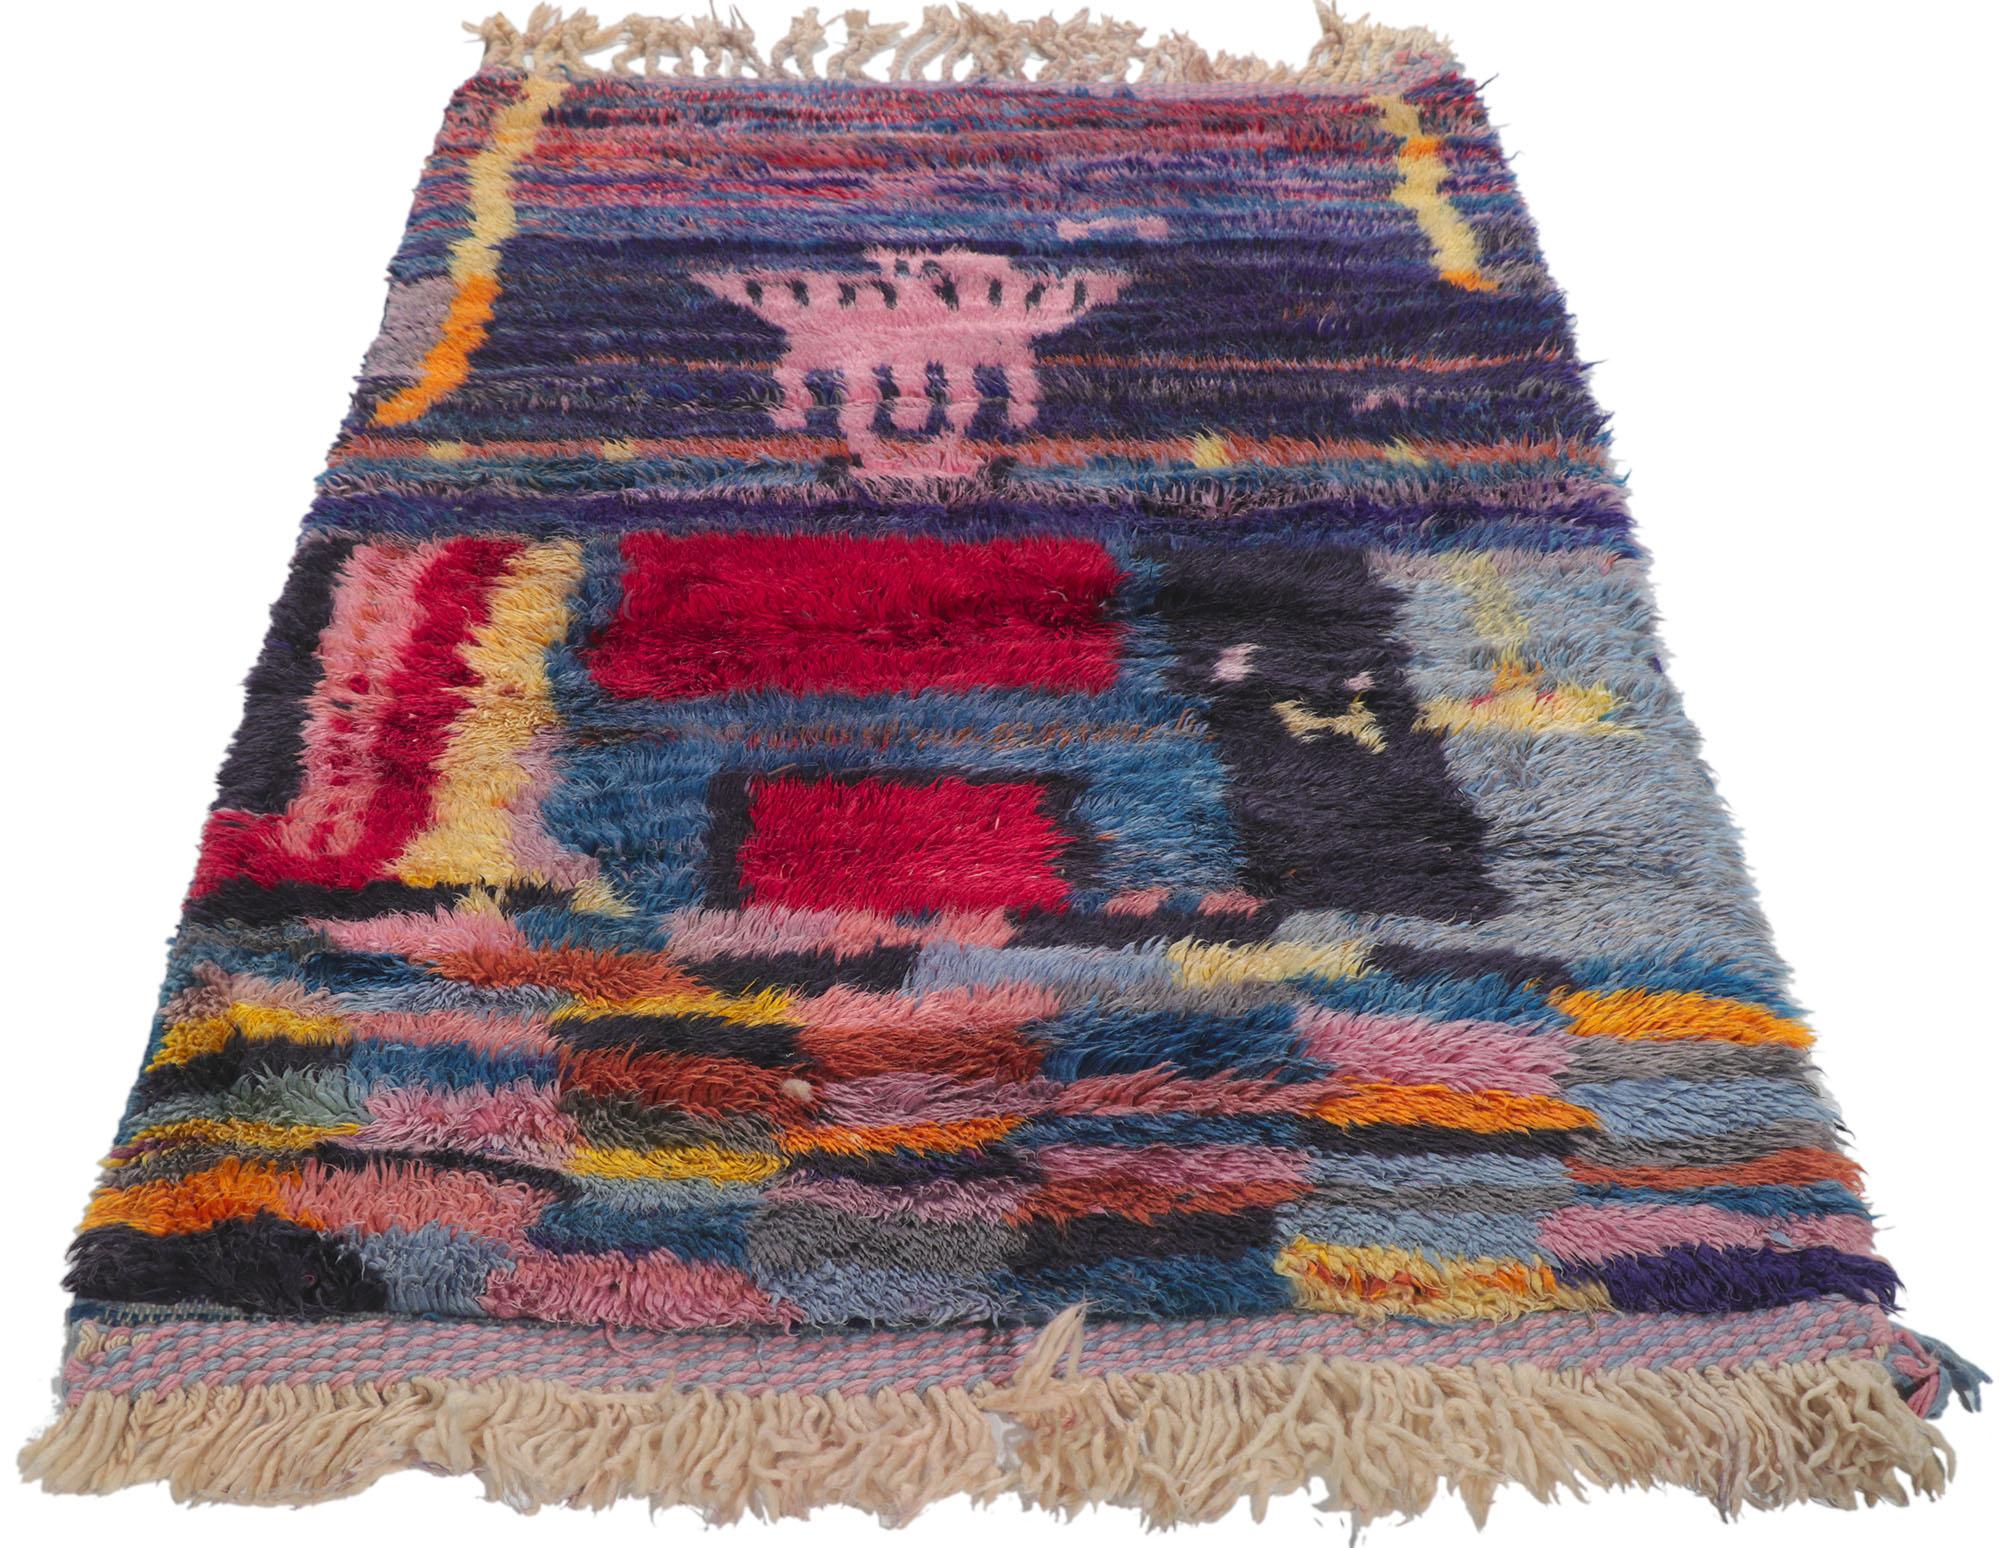 Tribal Contemporary Colorful Beni Ourain Moroccan Rug by Berber Tribes of Morocco For Sale